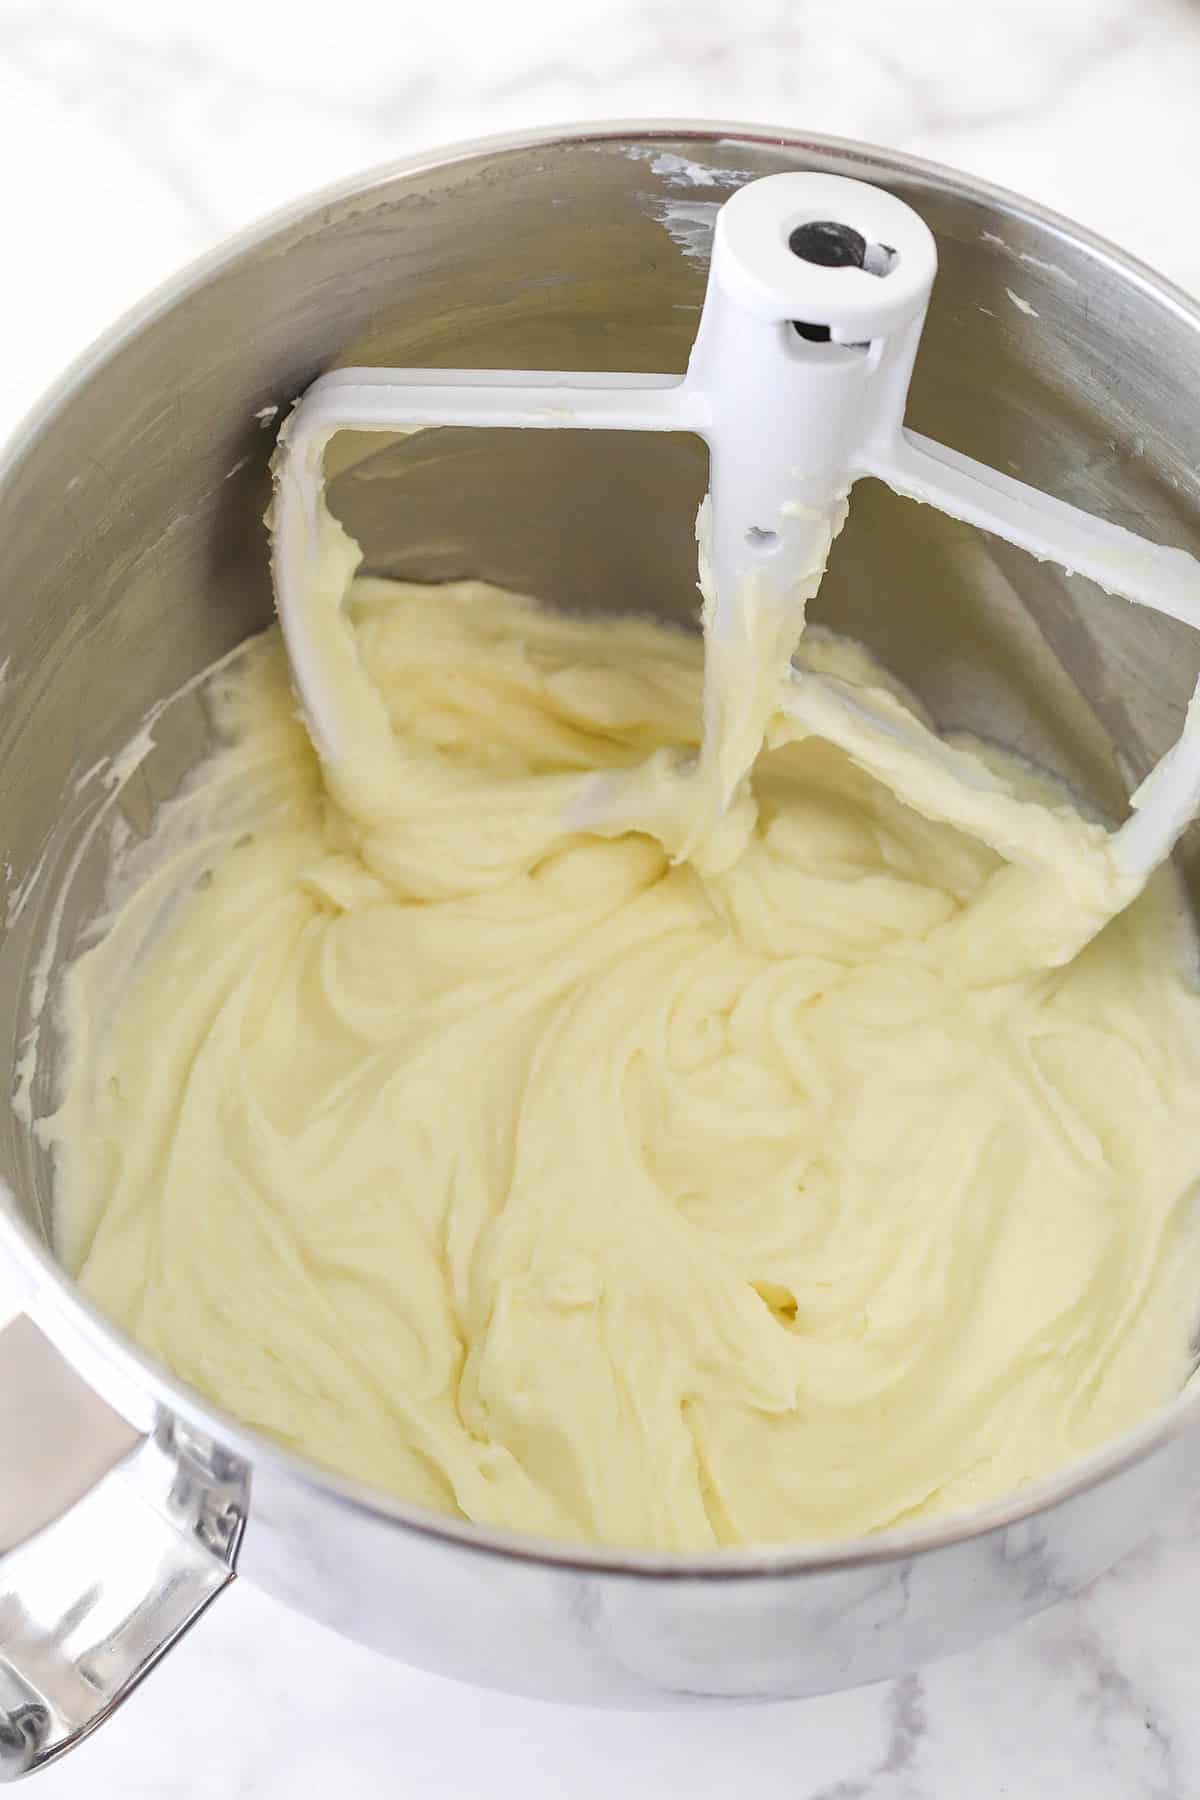 Beating cream cheese for cheesecake filling.